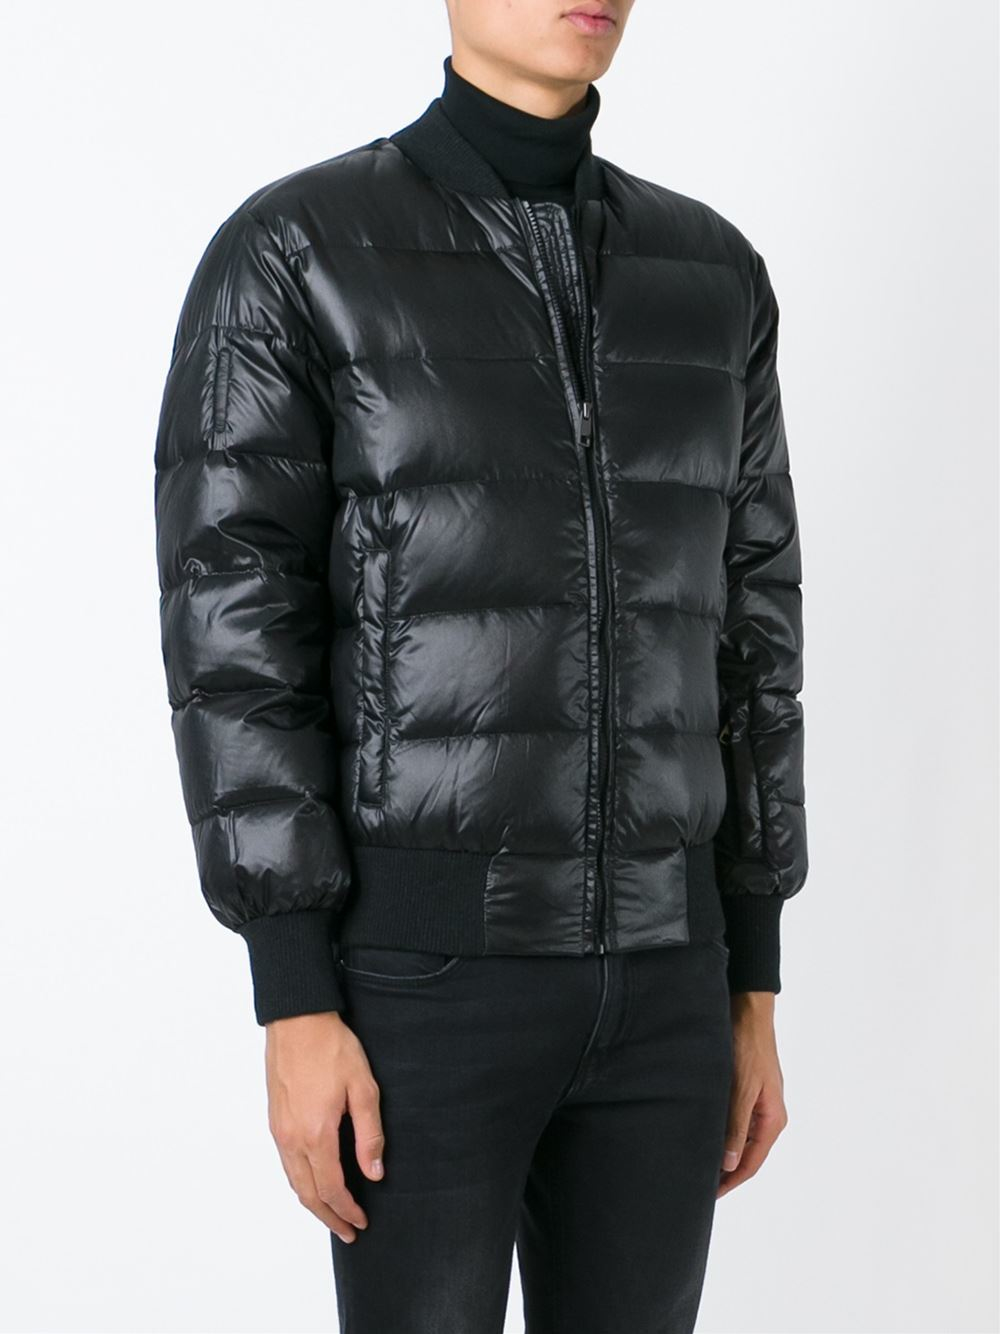 Dolce & gabbana 'recco Technology' Padded Jacket in Black for Men | Lyst